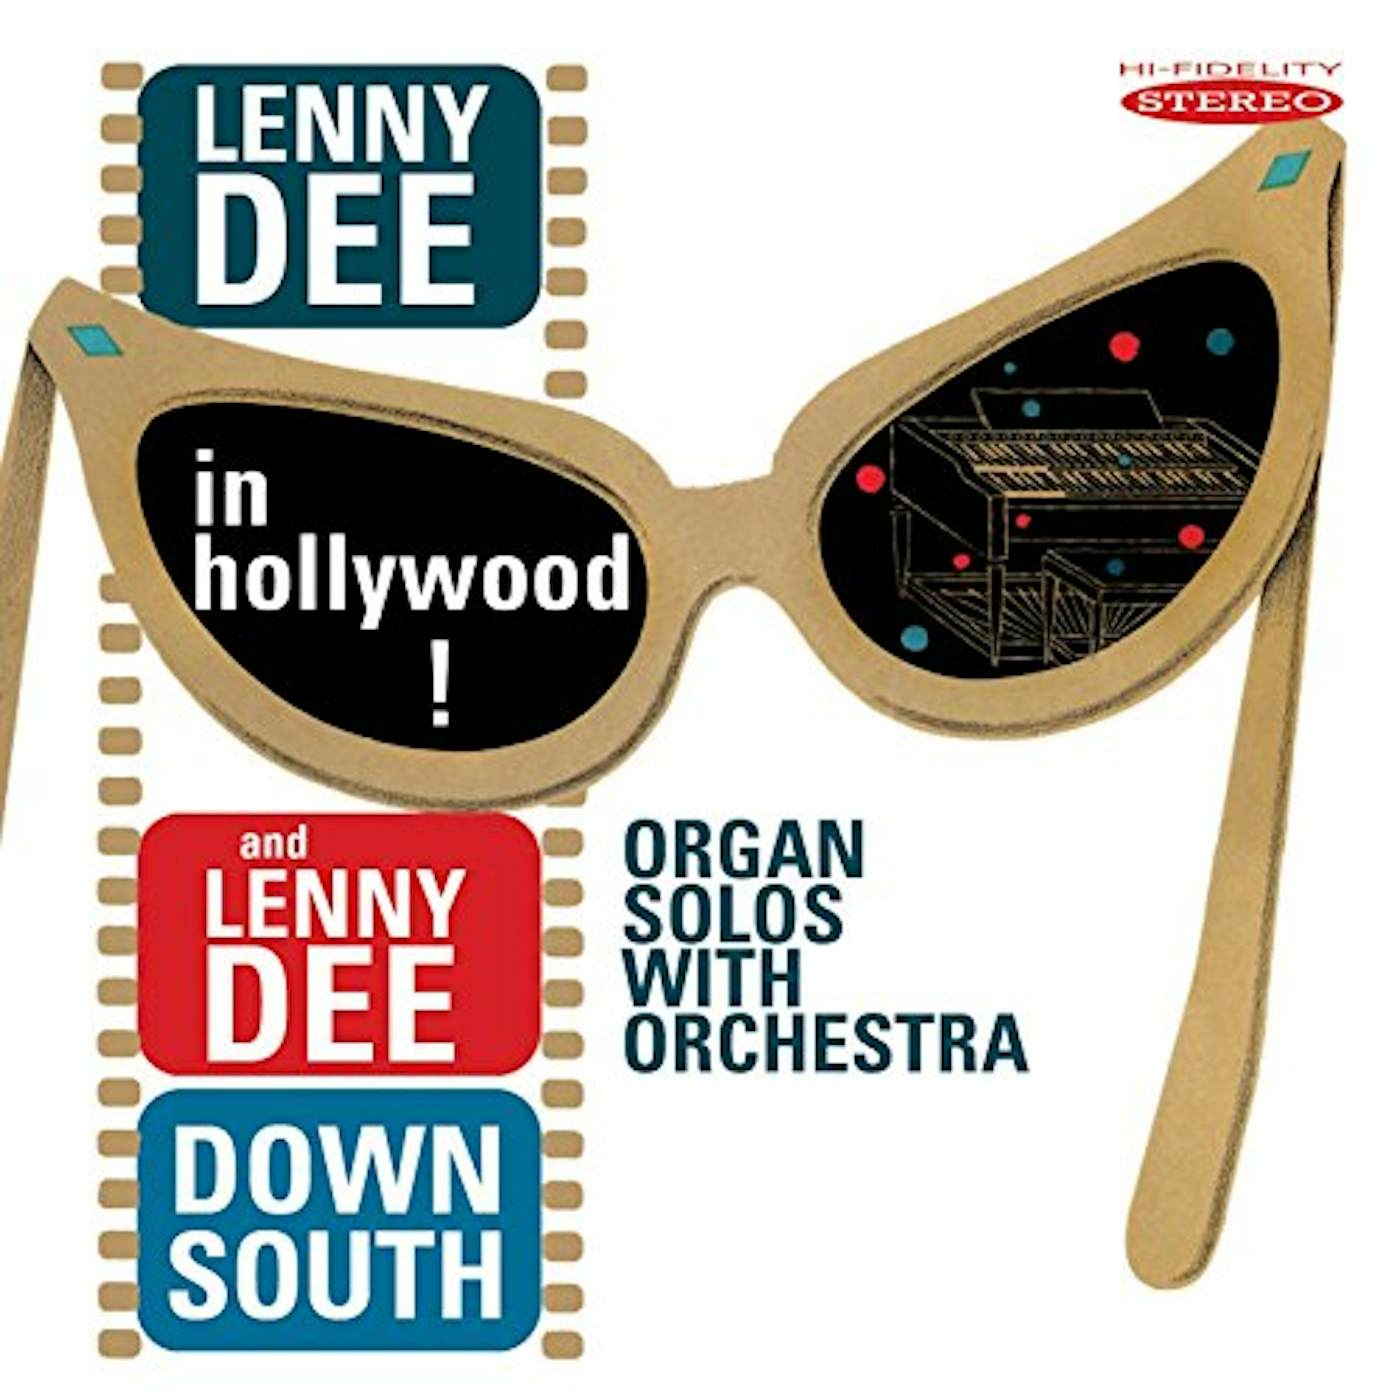 LENNY DEE IN HOLLYWOOD / LENNY DEE DOWN SOUTH CD